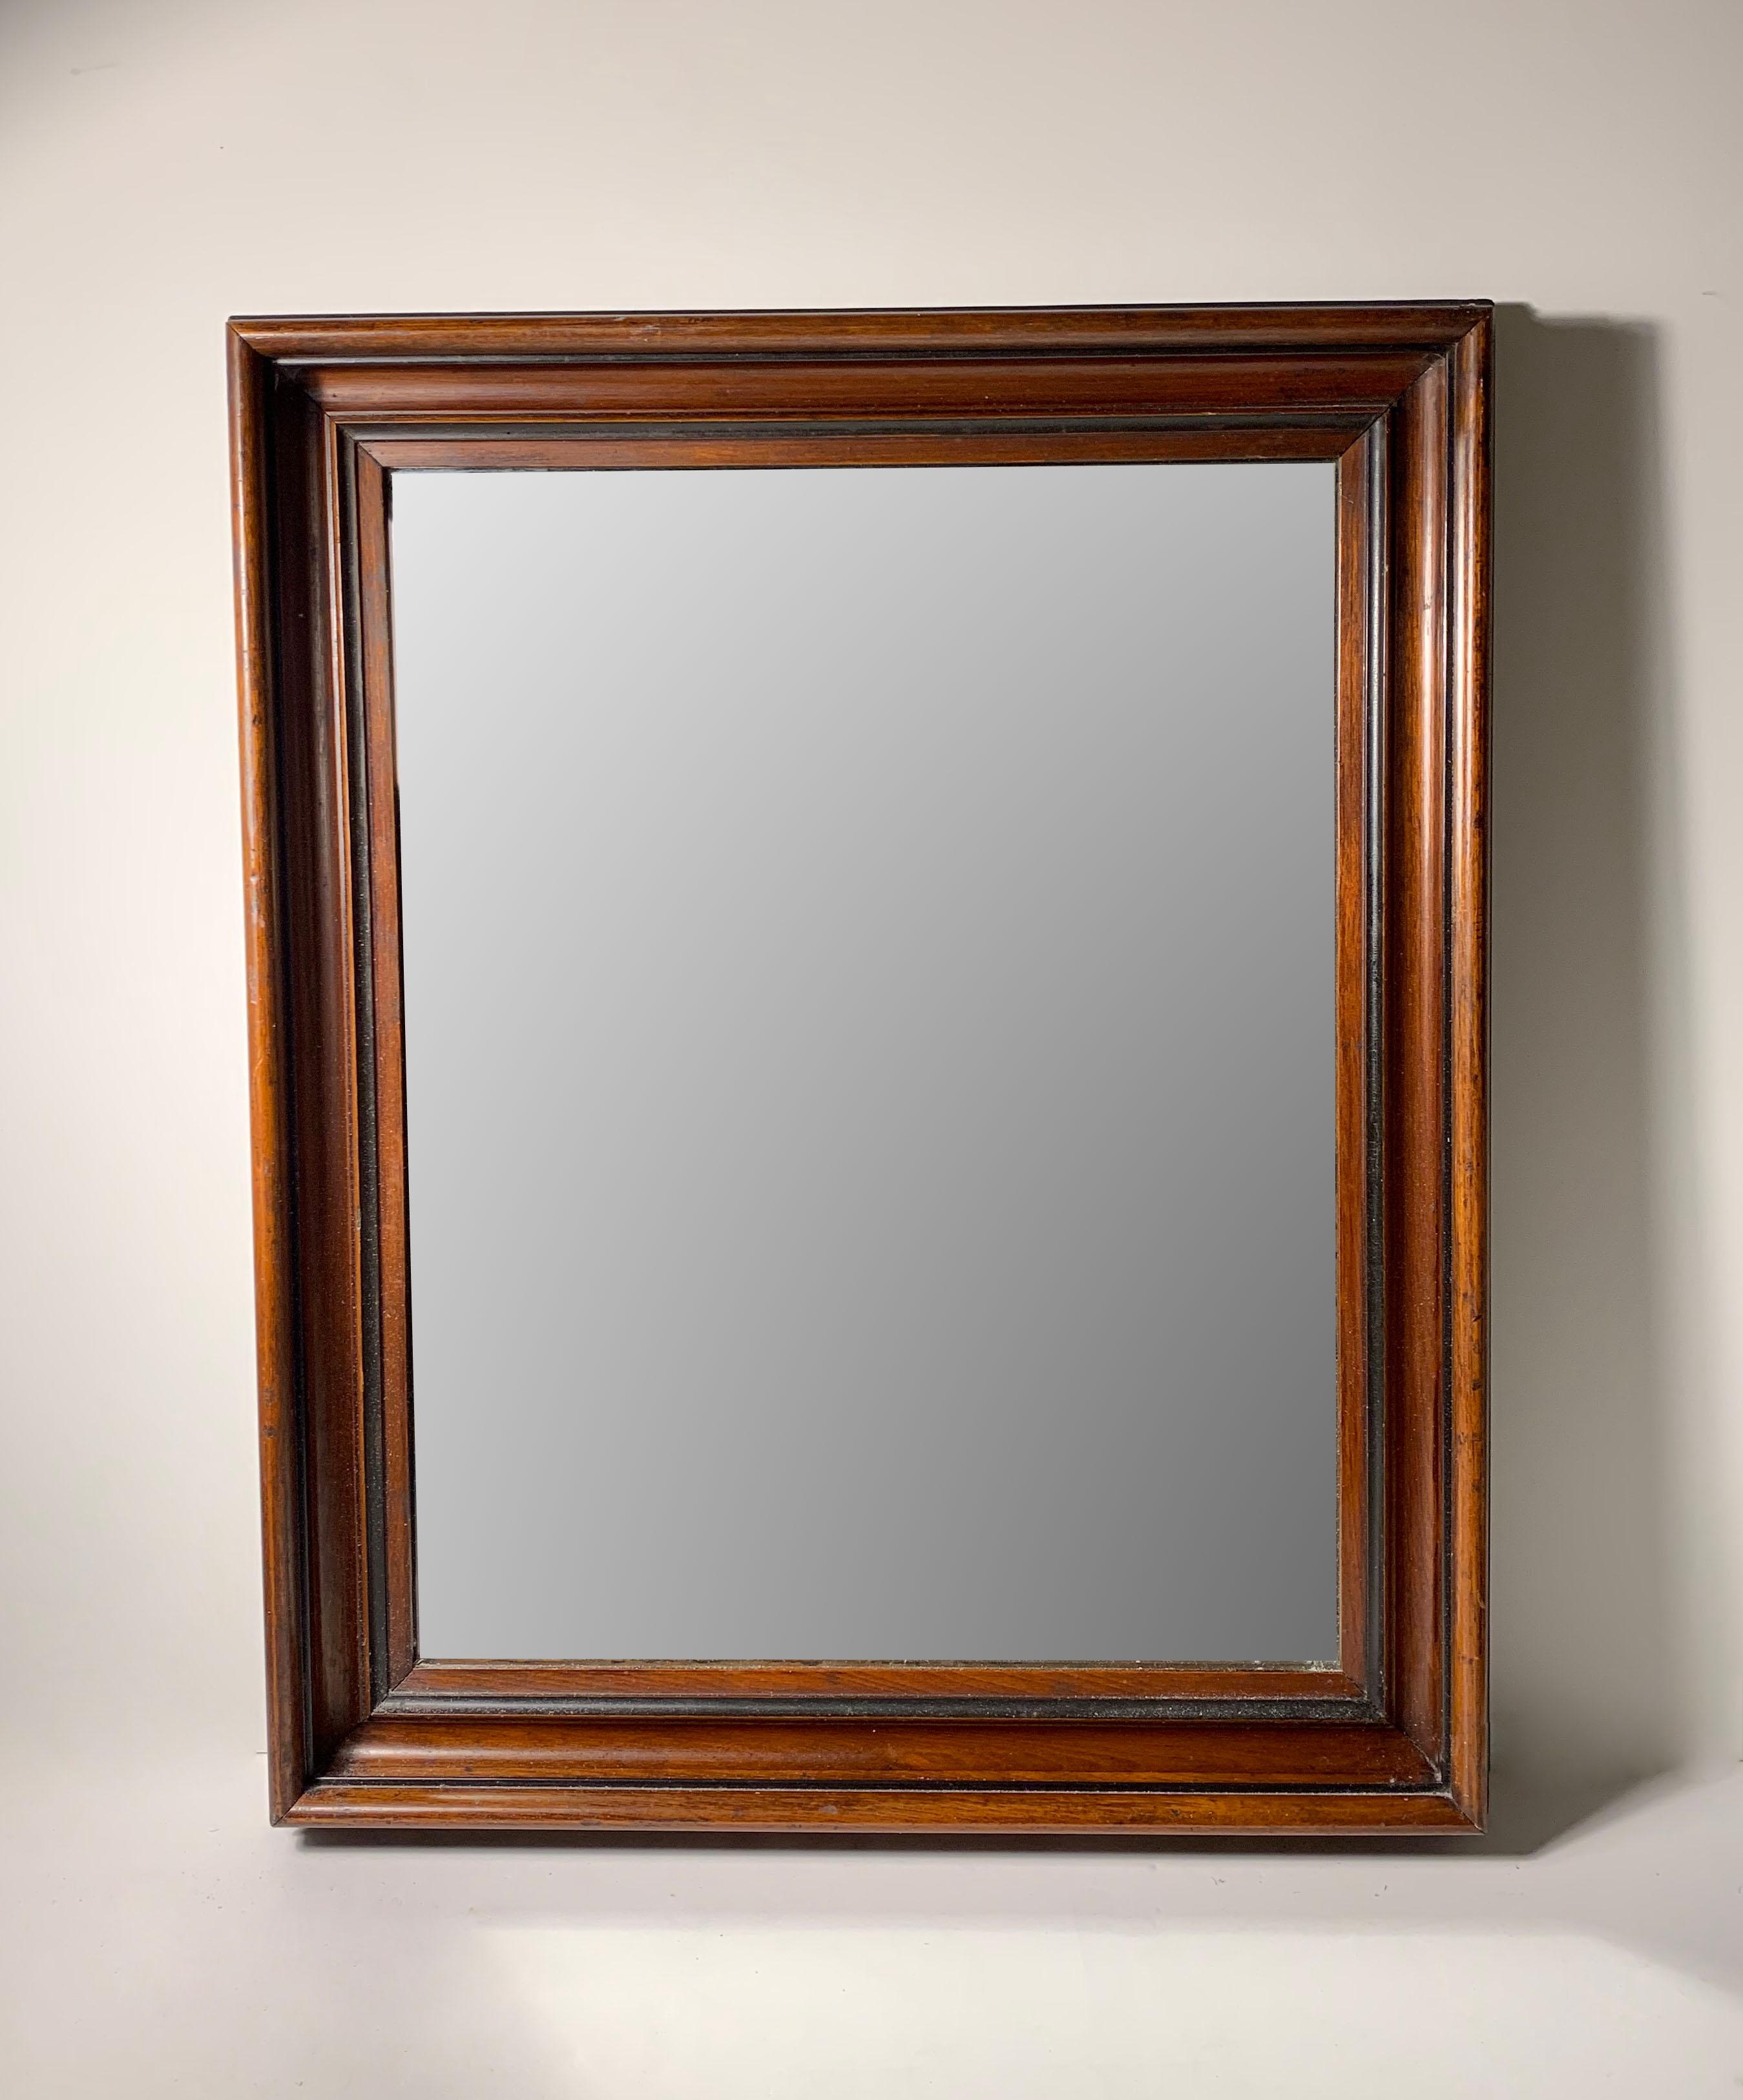 Antique 19th century Victorian Ebonized banding mirror / frame

This Frame is already set up as a Mirror. Glass mirror is in nice condition.